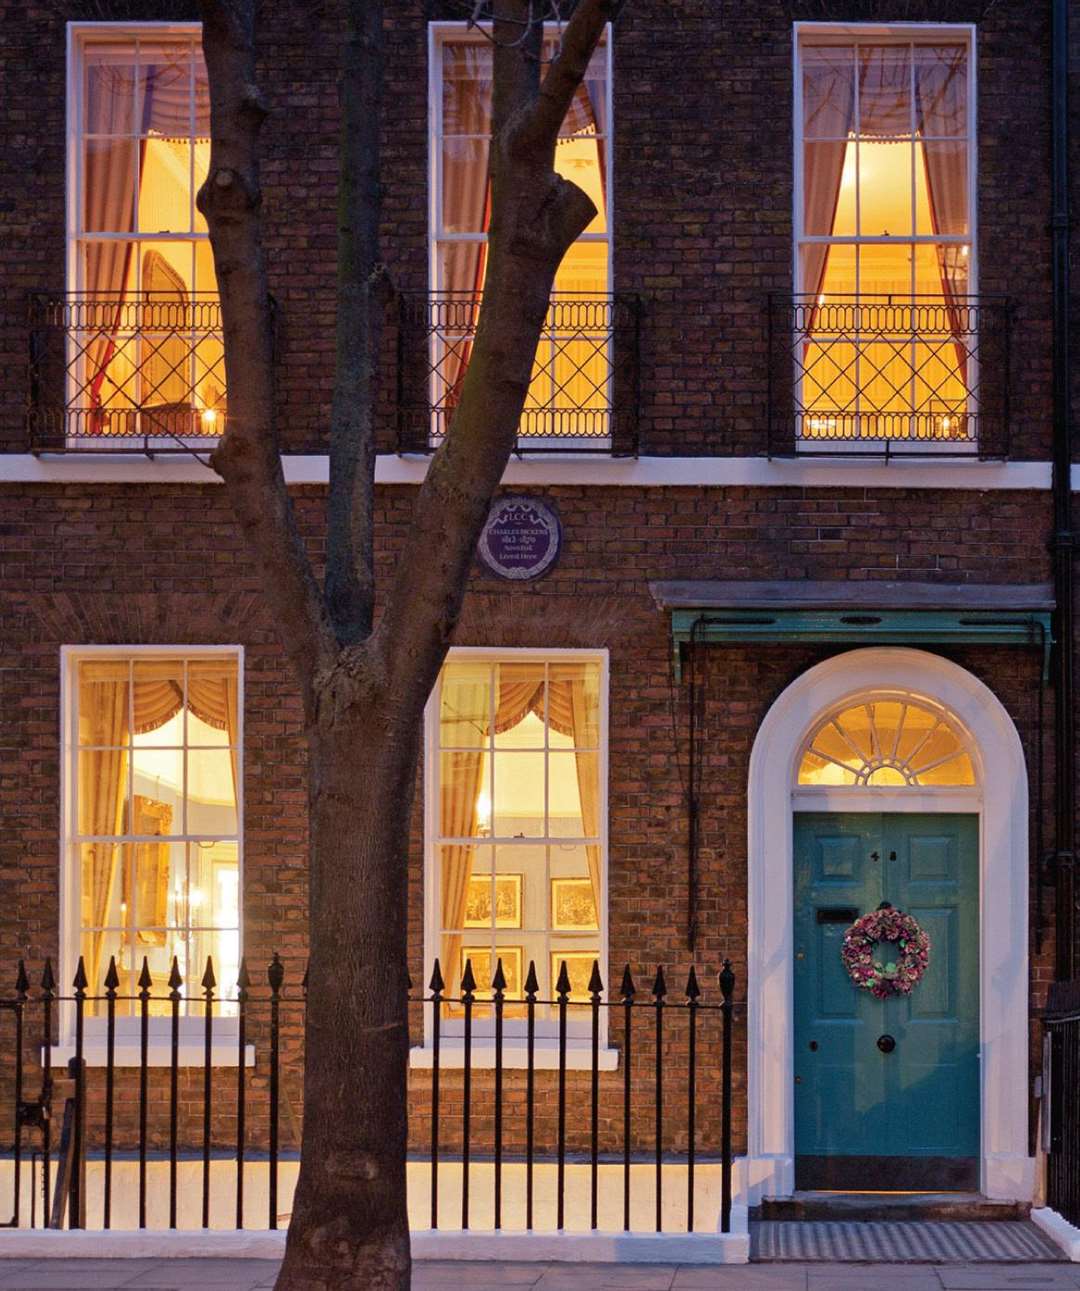 The Dickens Museum in London